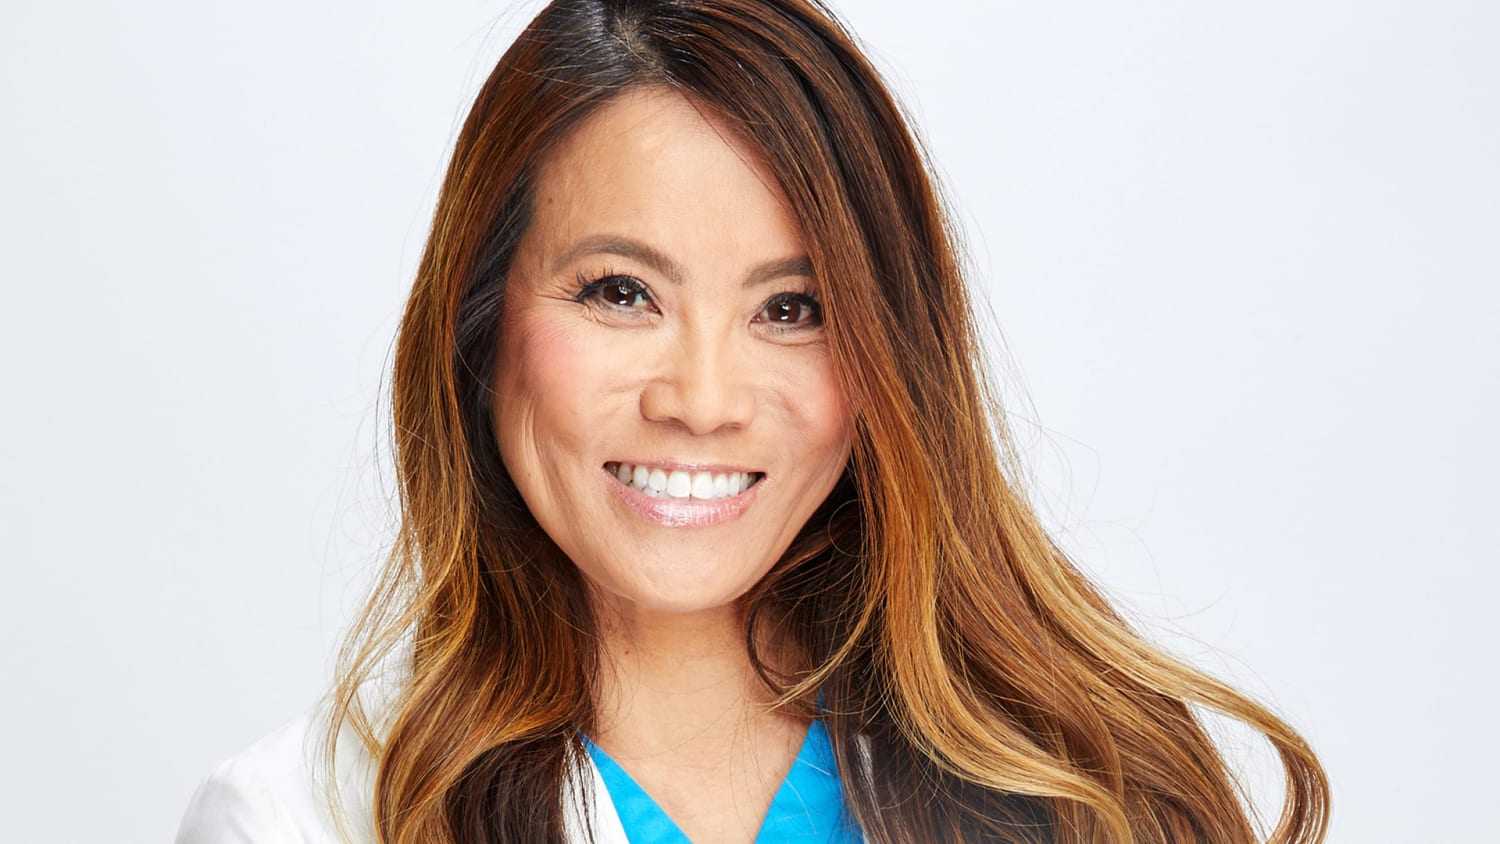 Dr. Pimple Popper us her beauty